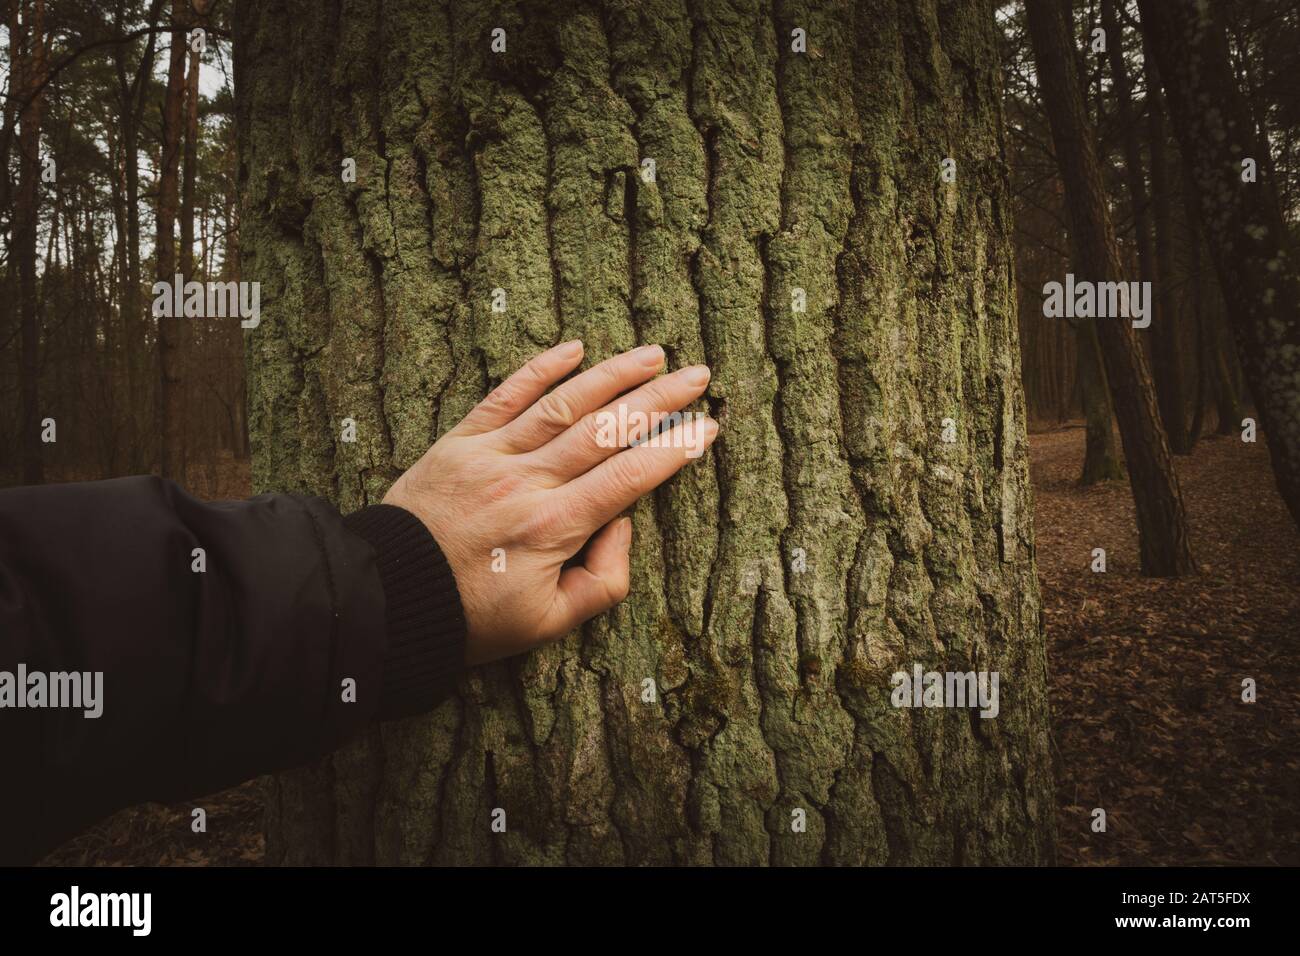 Hand touching a tree trunk in the park Stock Photo